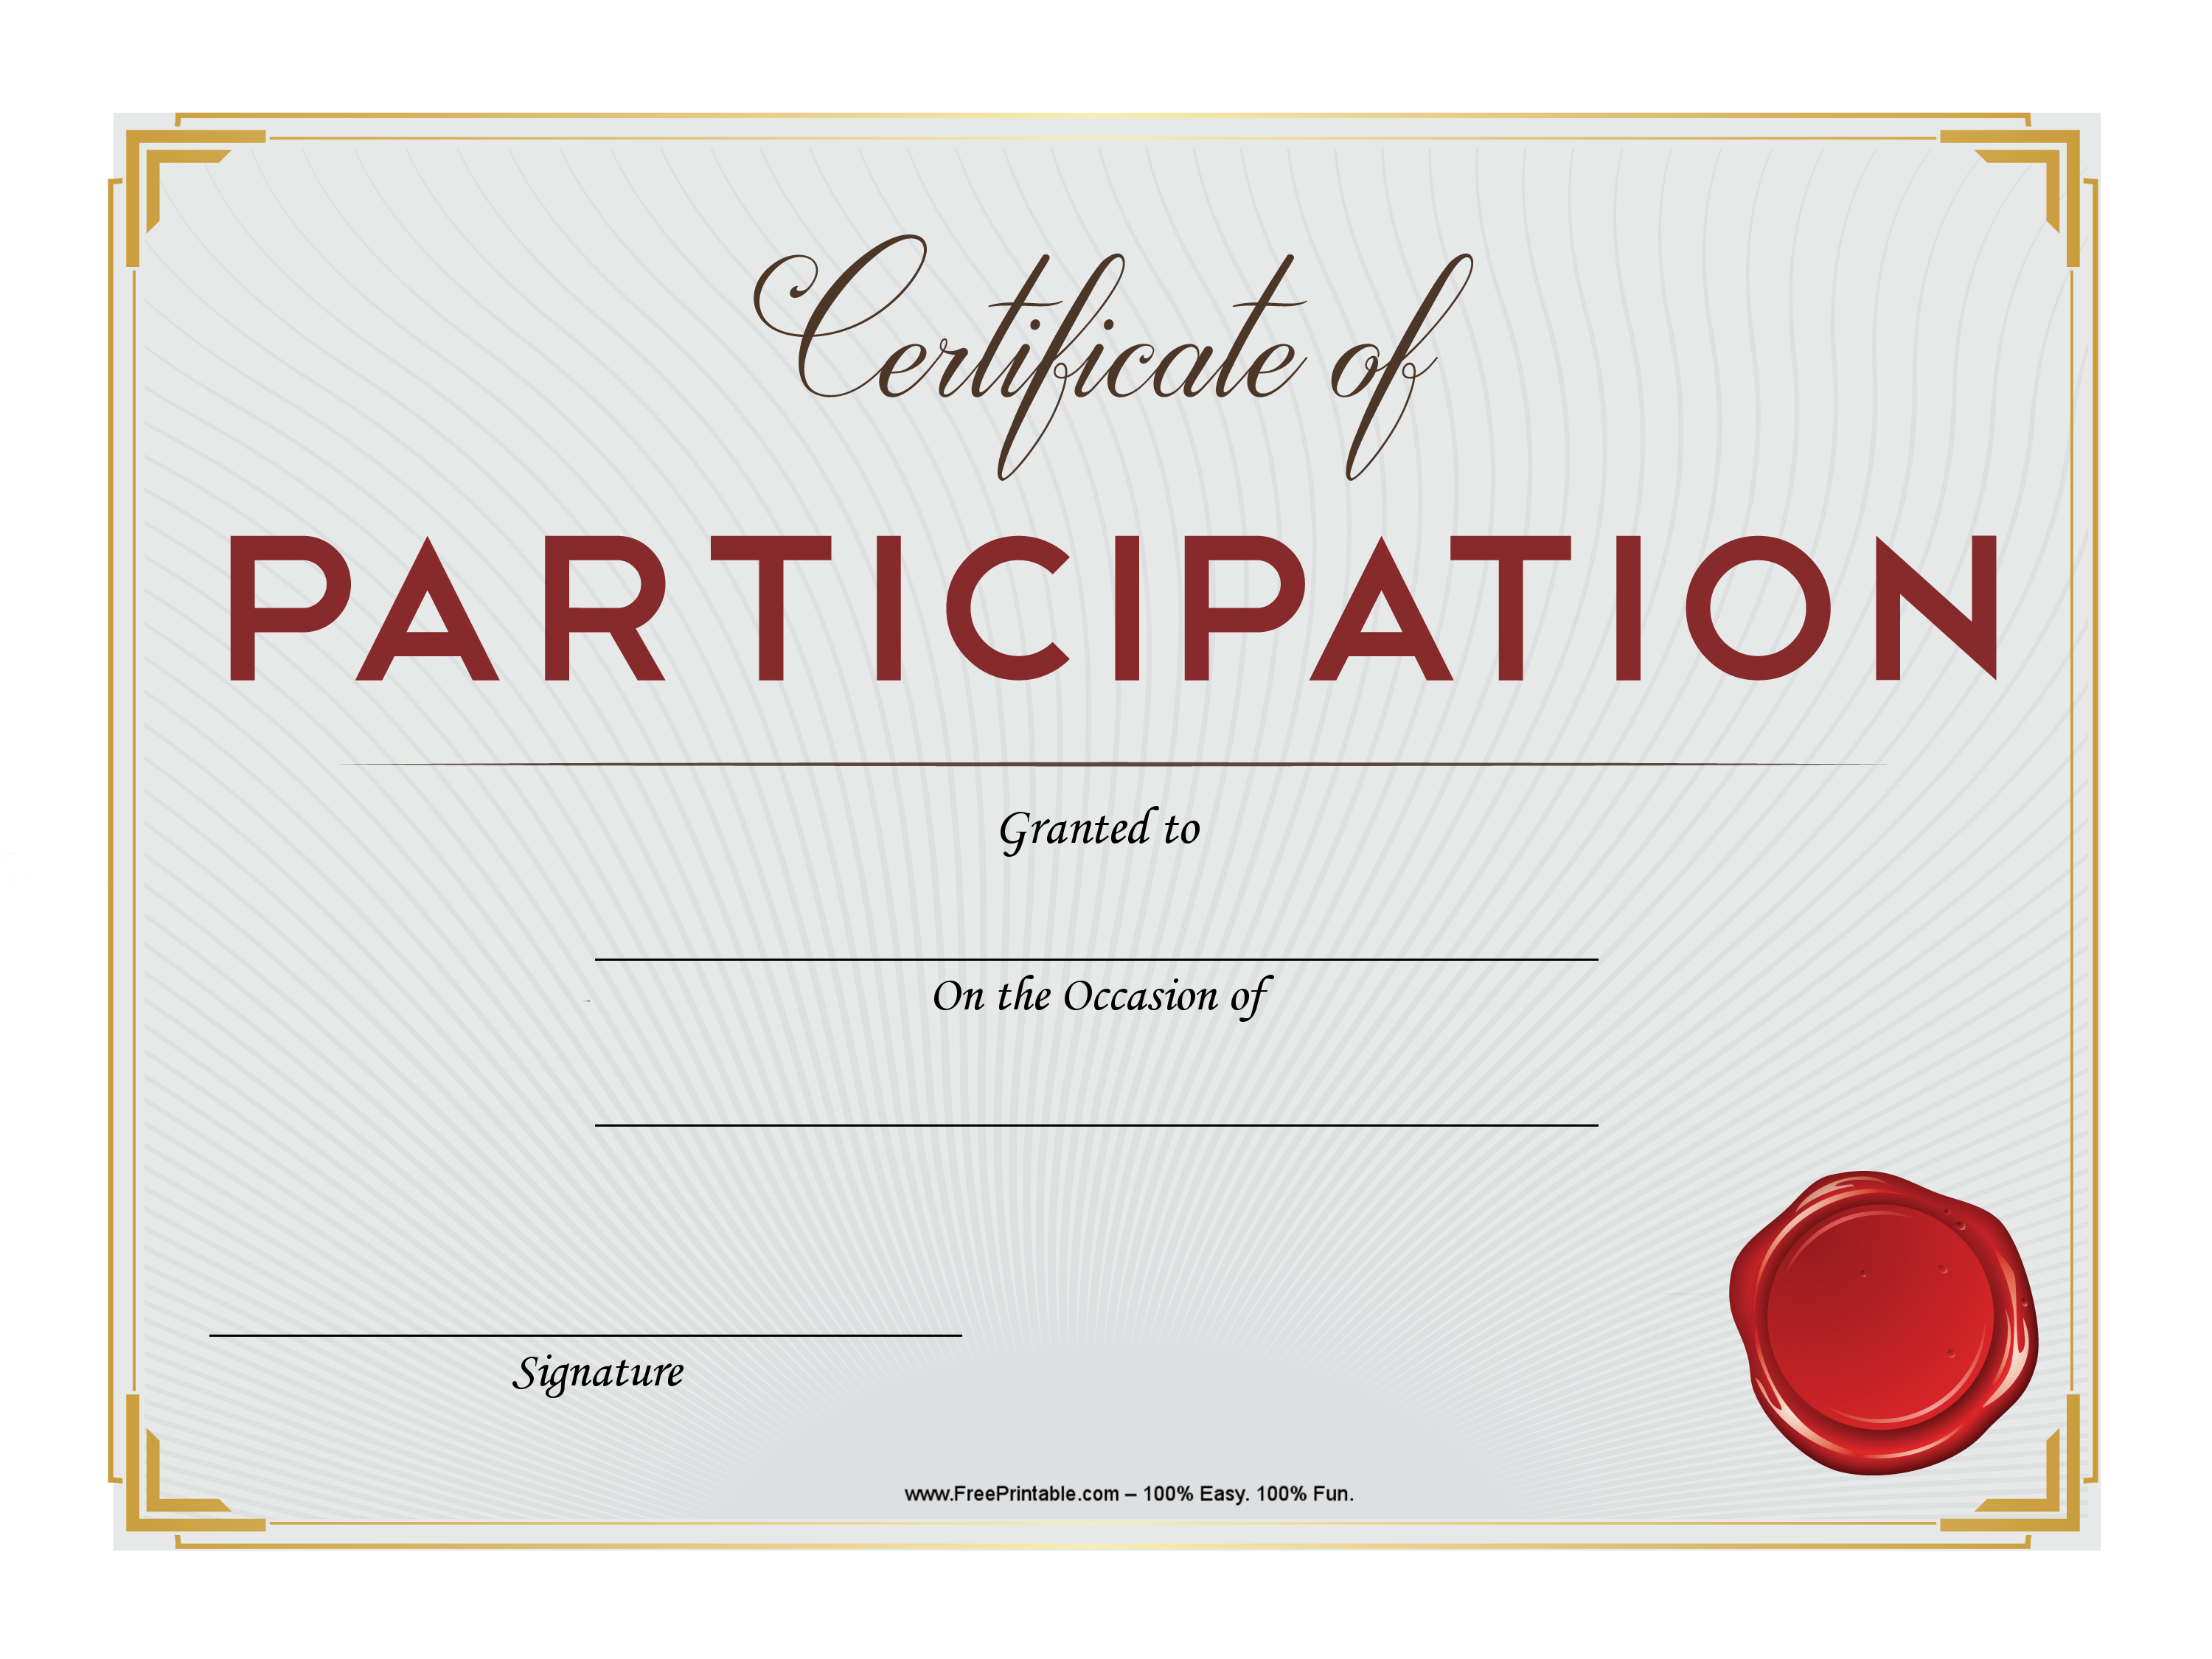 customize-your-free-printable-participation-certificate-with-red-seal